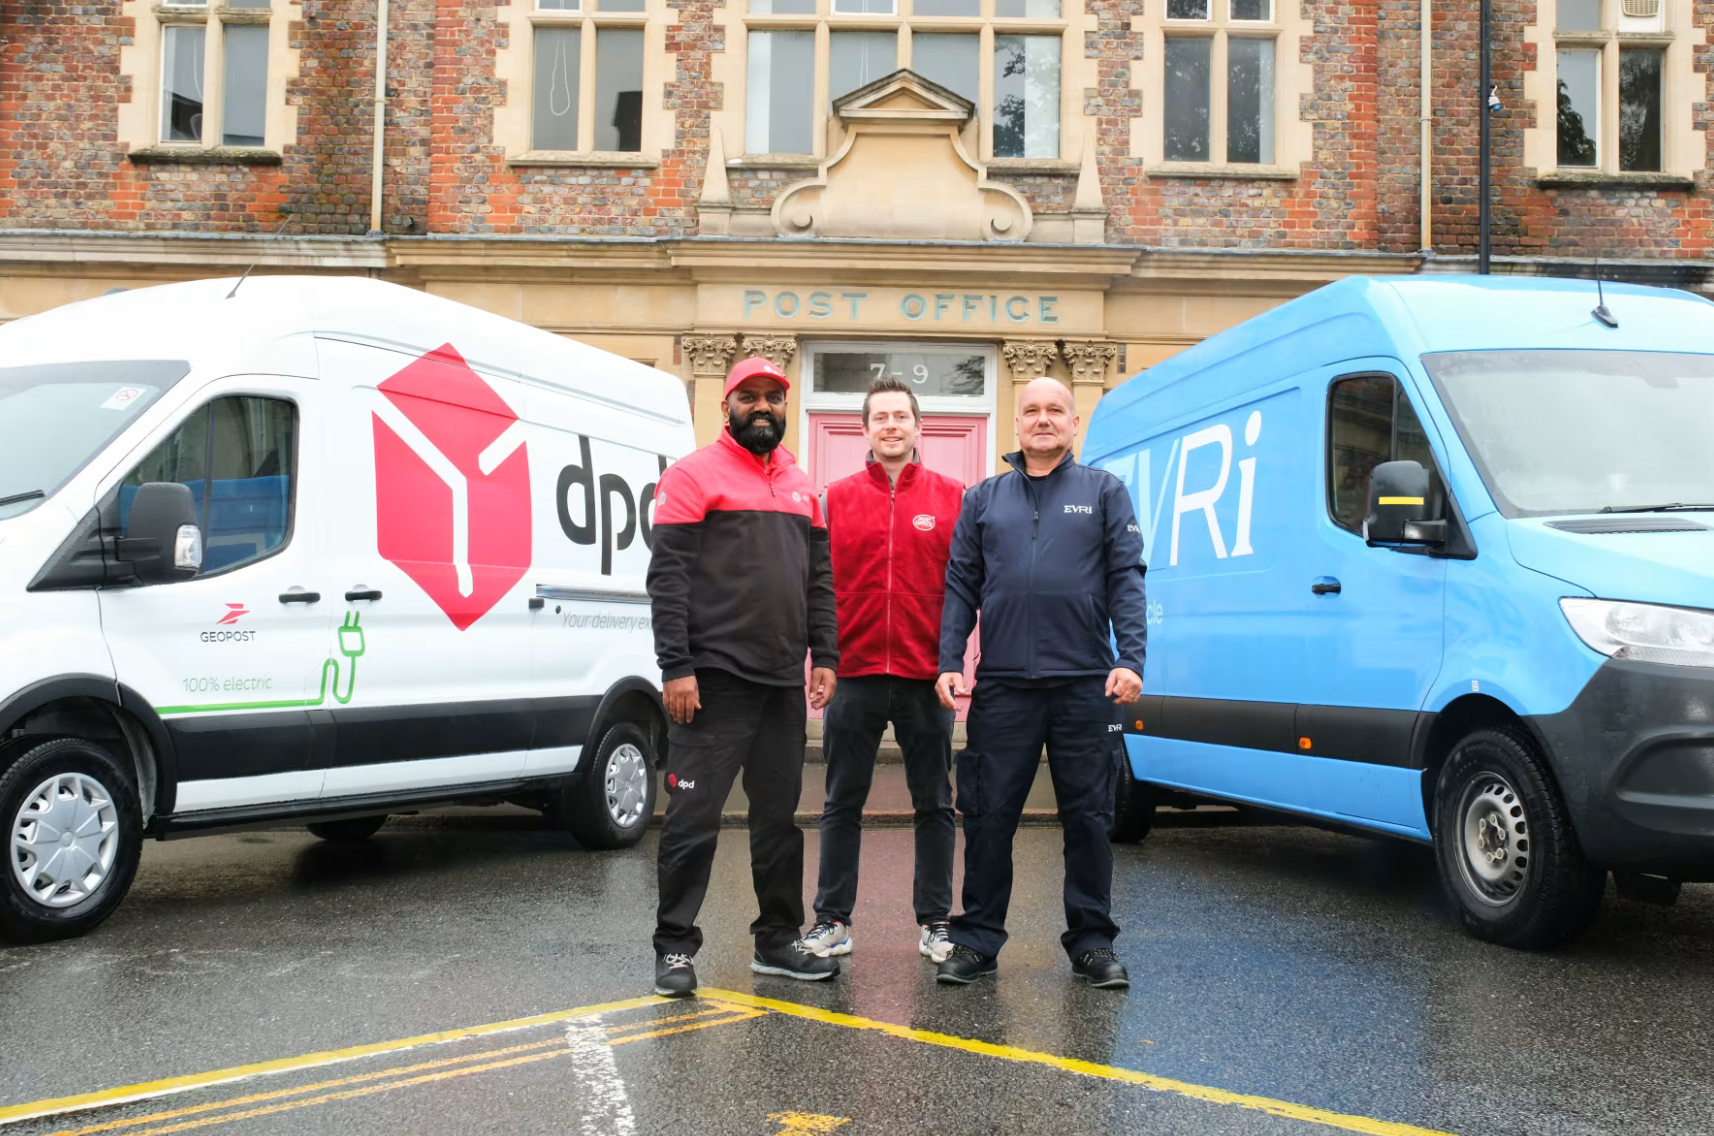 Post Office joins forces with DPD and Evri